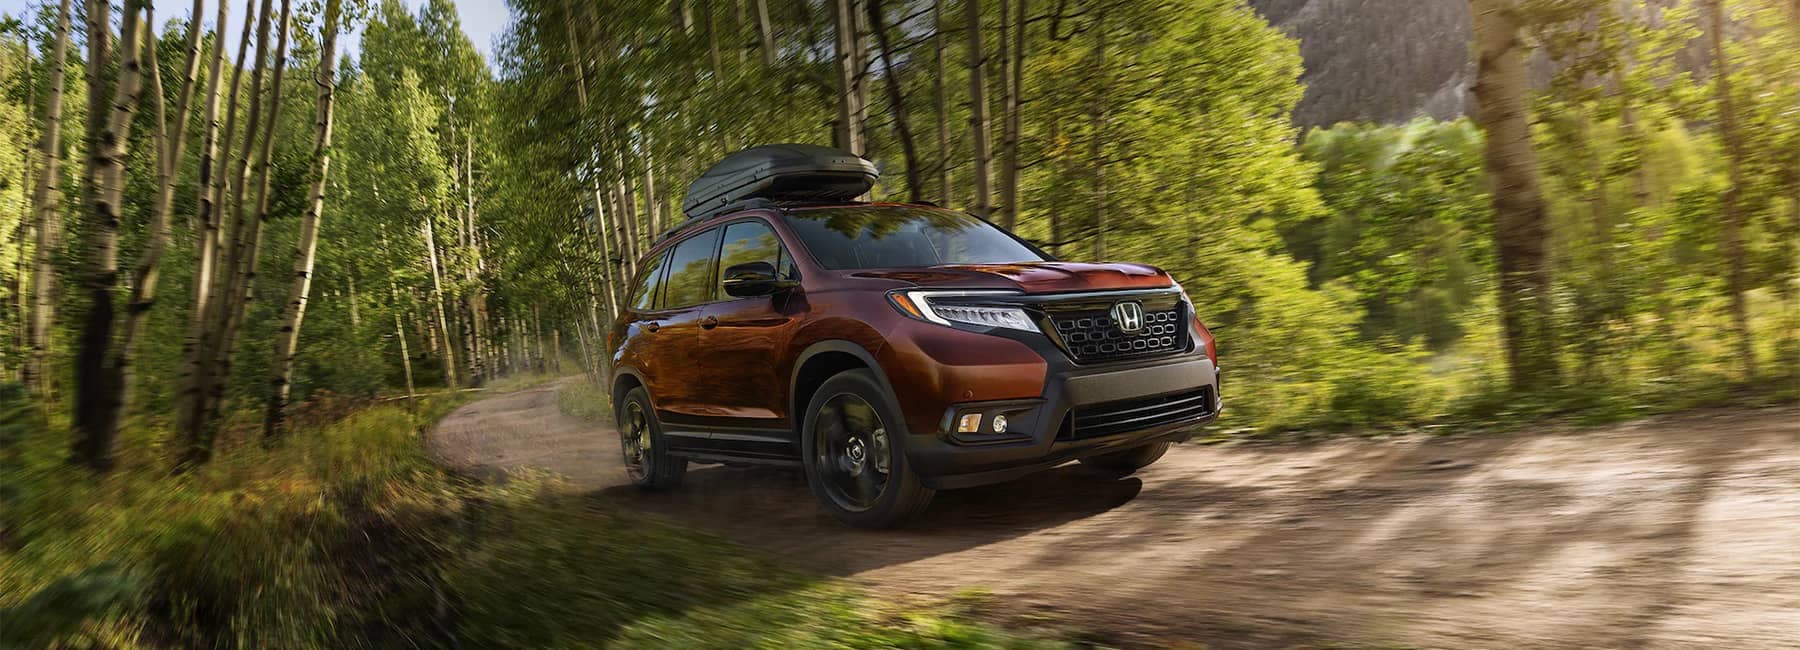 2020 Red Honda Passport Driving in Forest